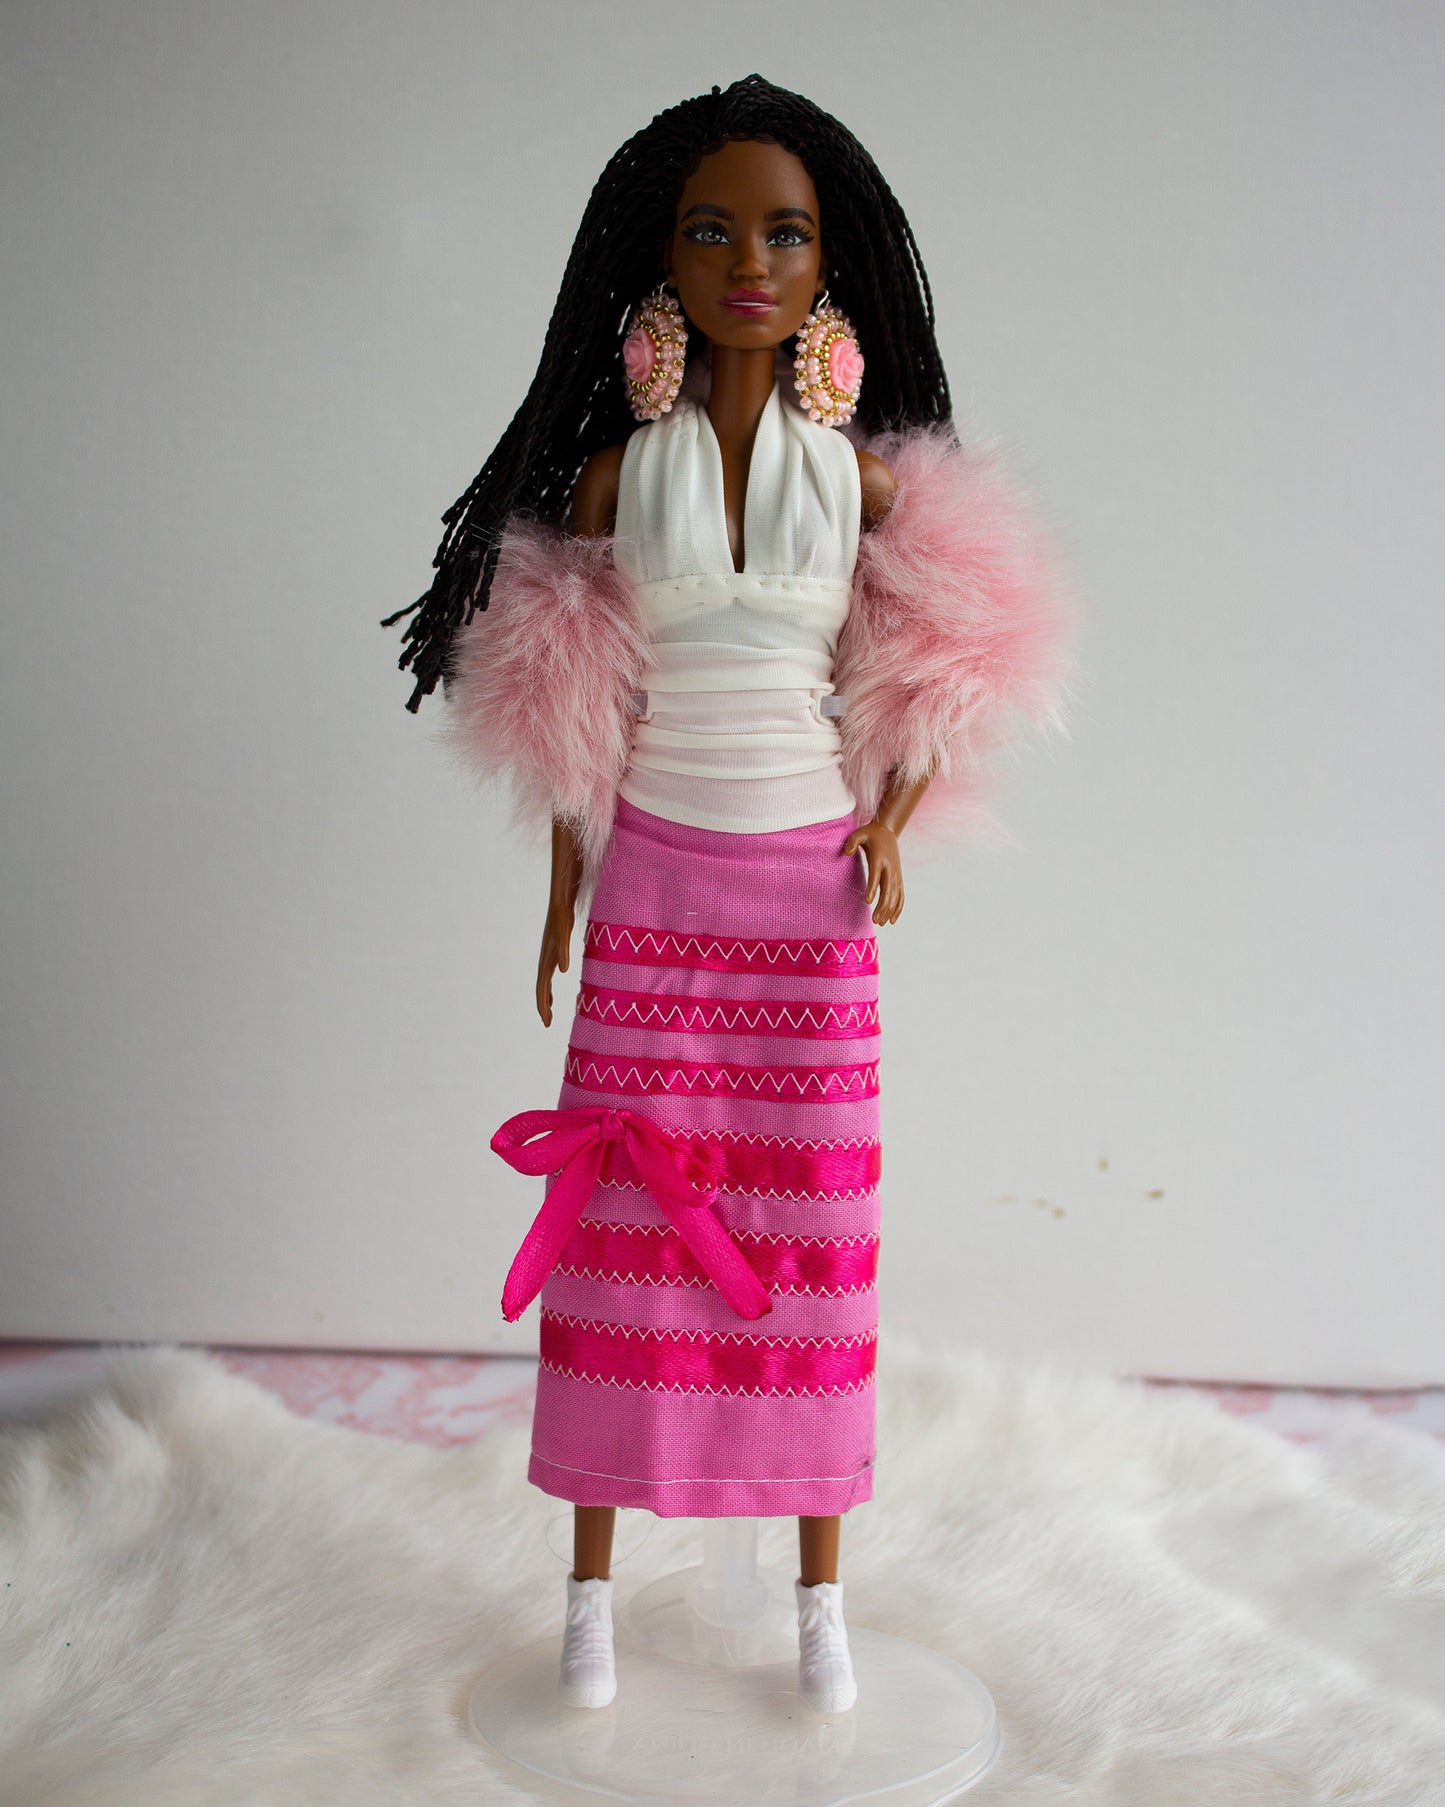 Doll #6 Pretty in Pink Afro-Indigenous